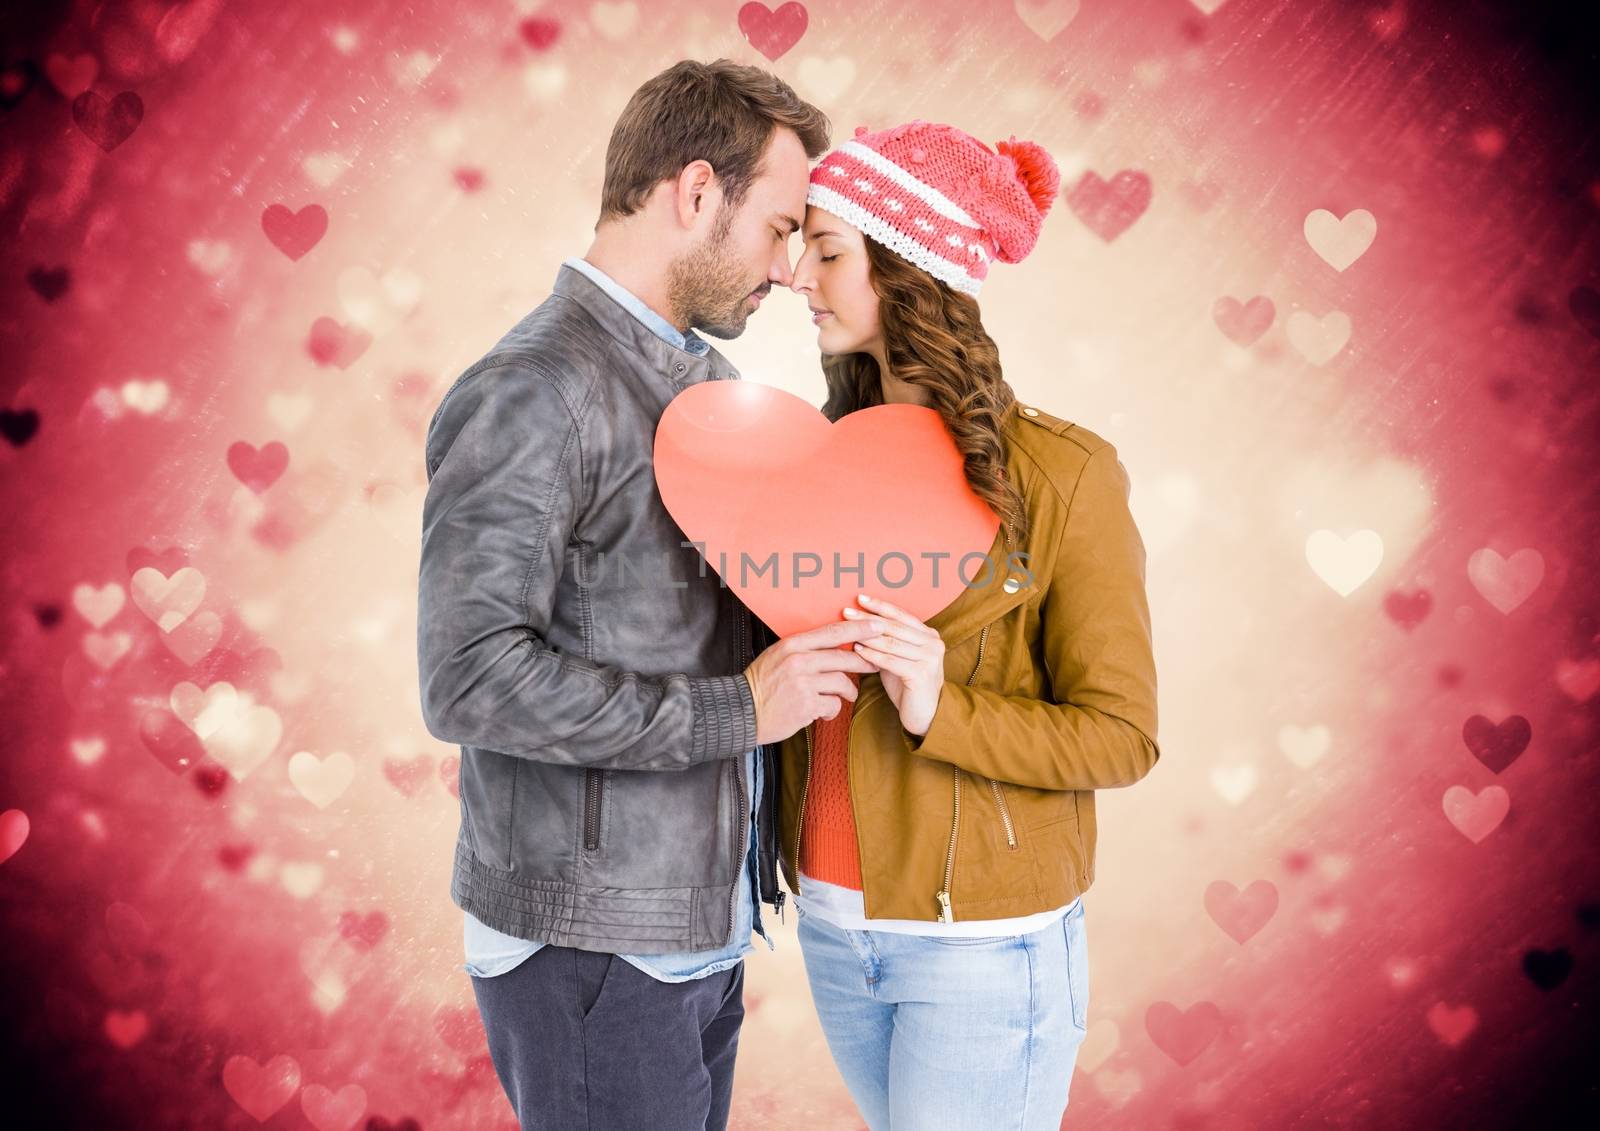 Composite image of couple holding a heart by Wavebreakmedia